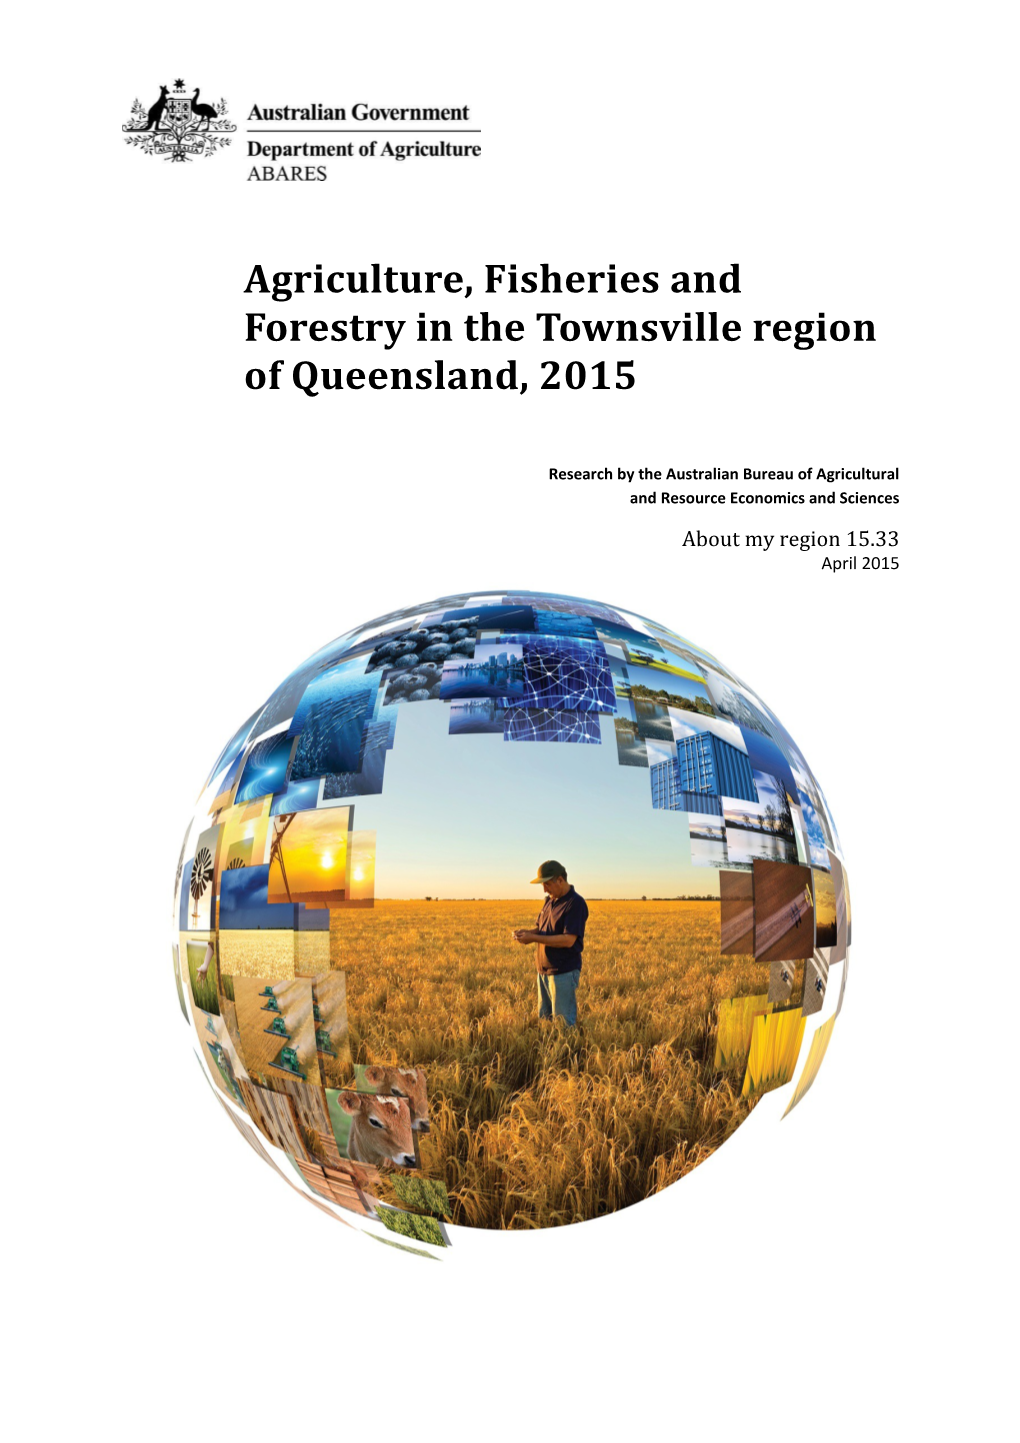 Agriculture, Fisheries and Forestry in the Townsville Region of Queensland, 2015